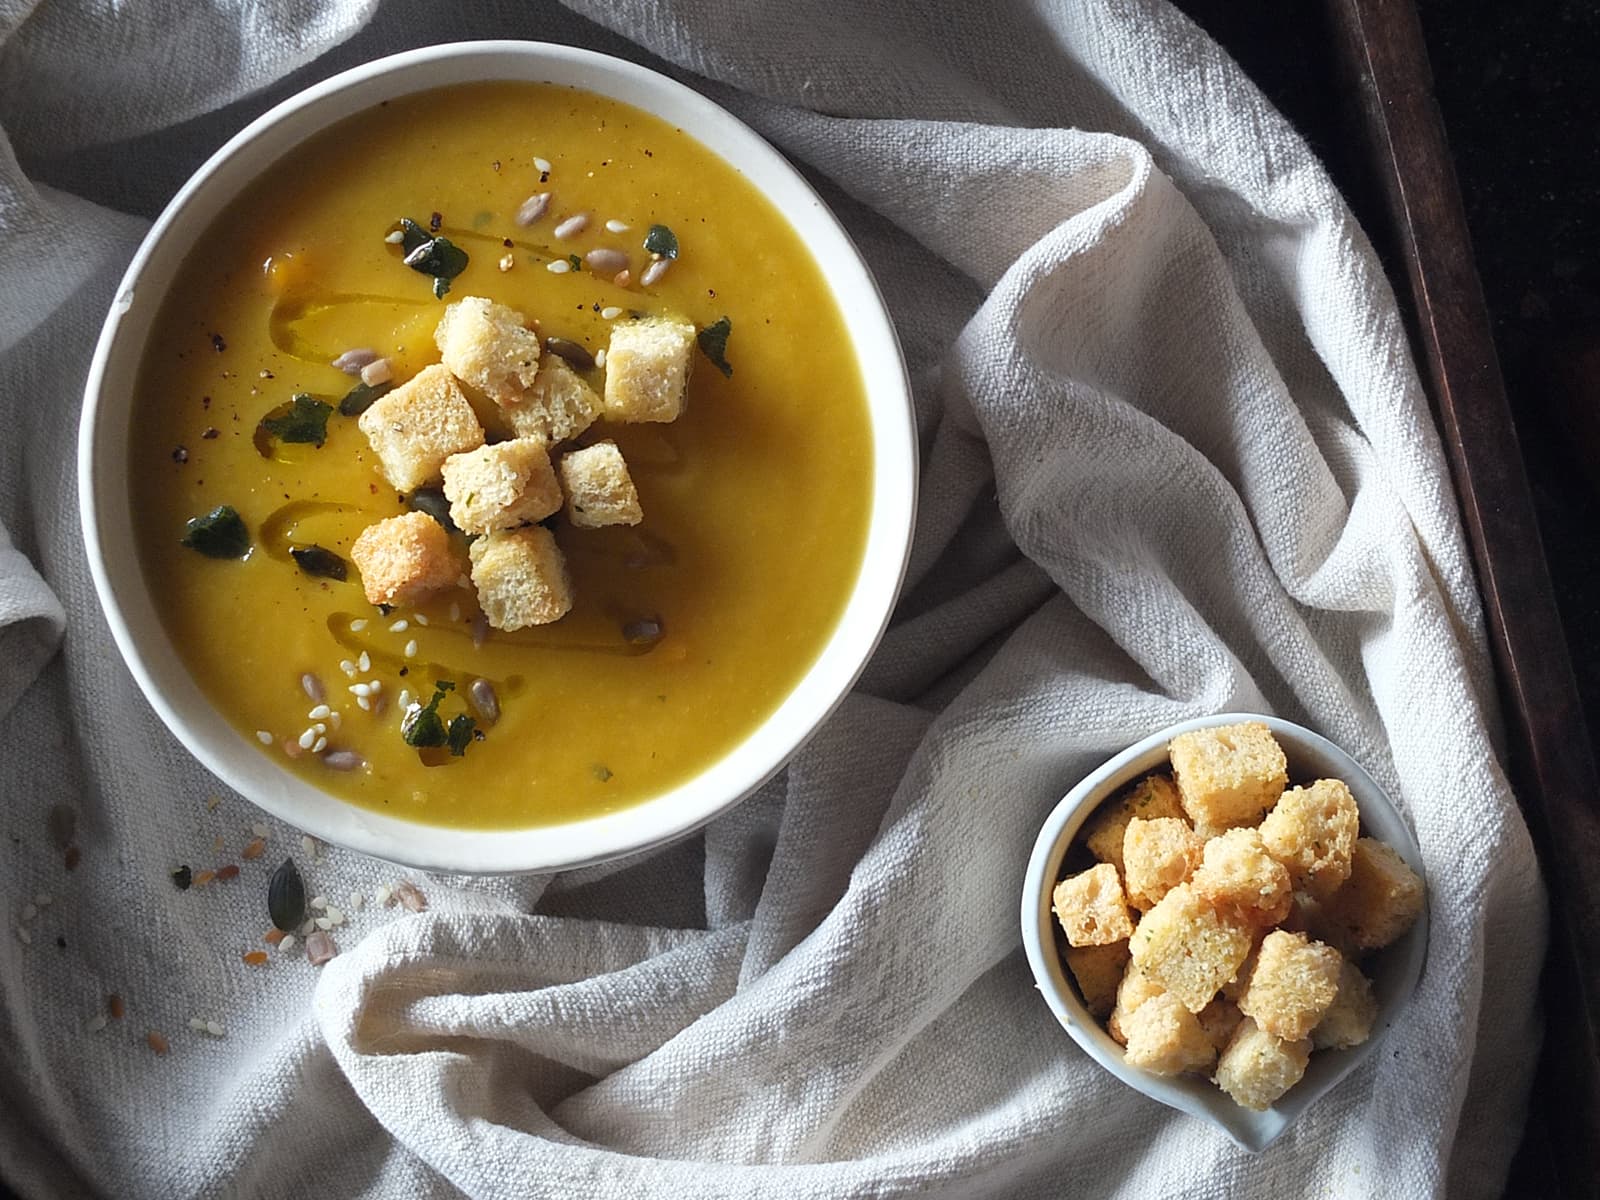 Photo of a bowl of creamy pumpkin soup topped with homemade crunchy croutons and seeds, with a little bowl of crunchy croutons.